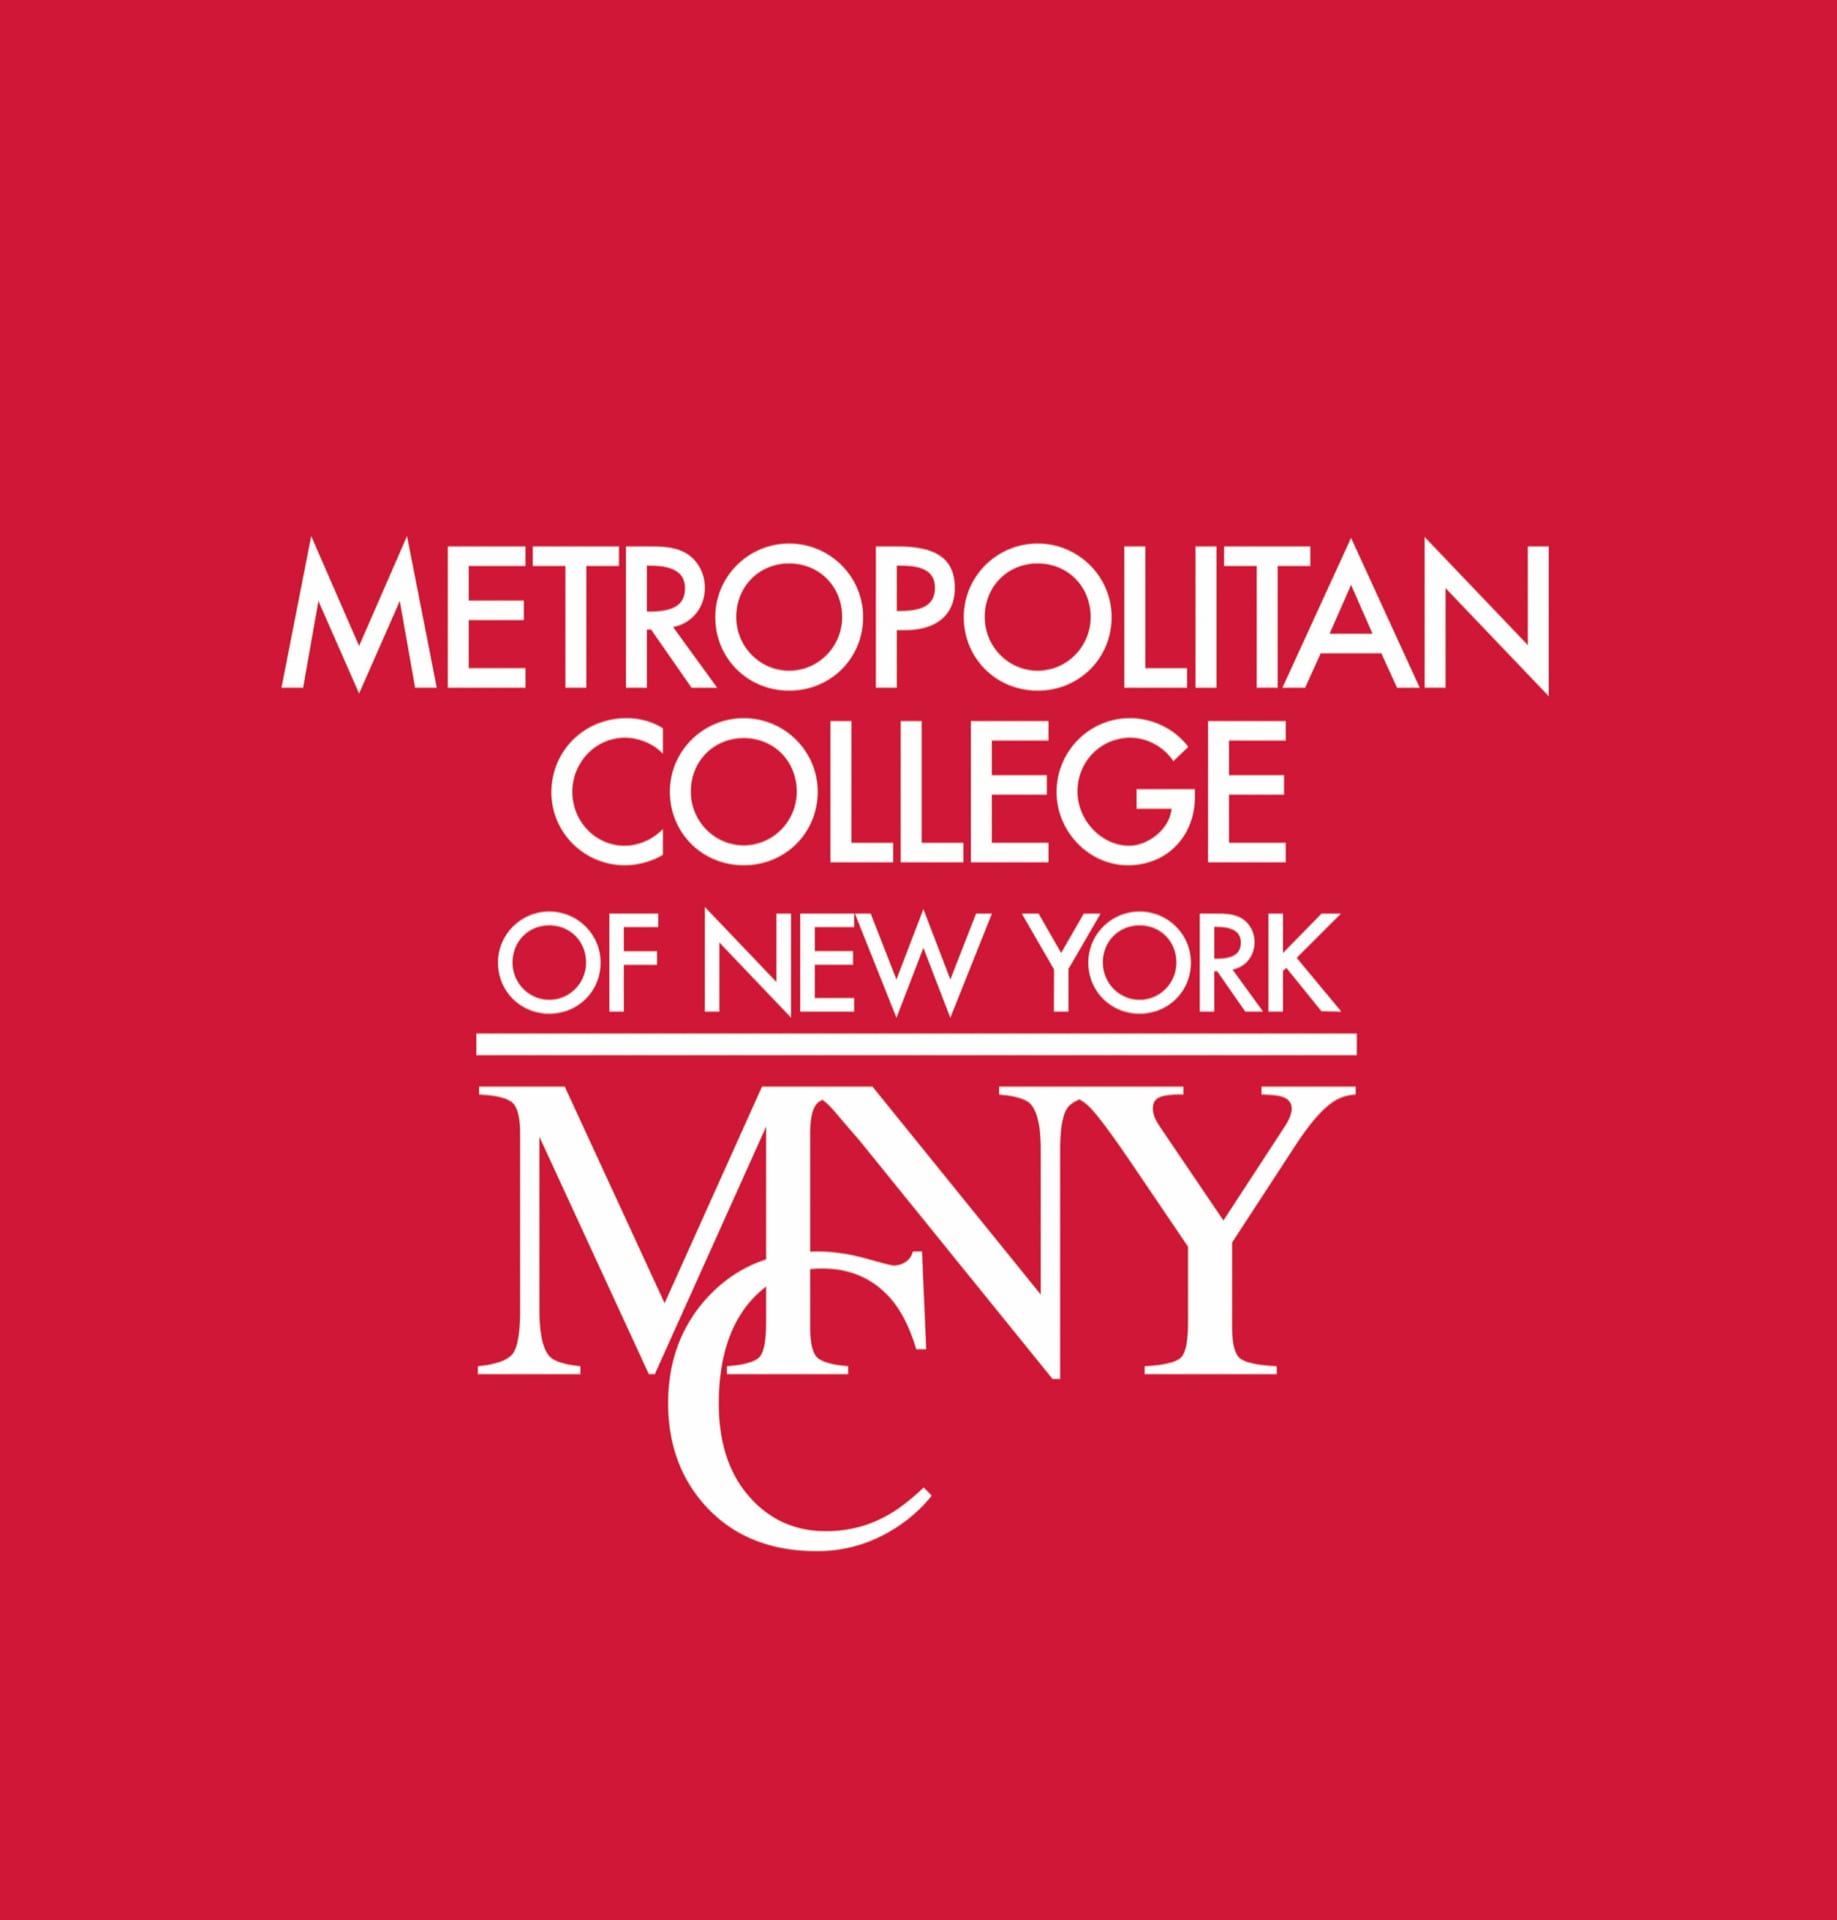 Metropolitan College of New York's School Logo, if clicked, it will take you to their website.